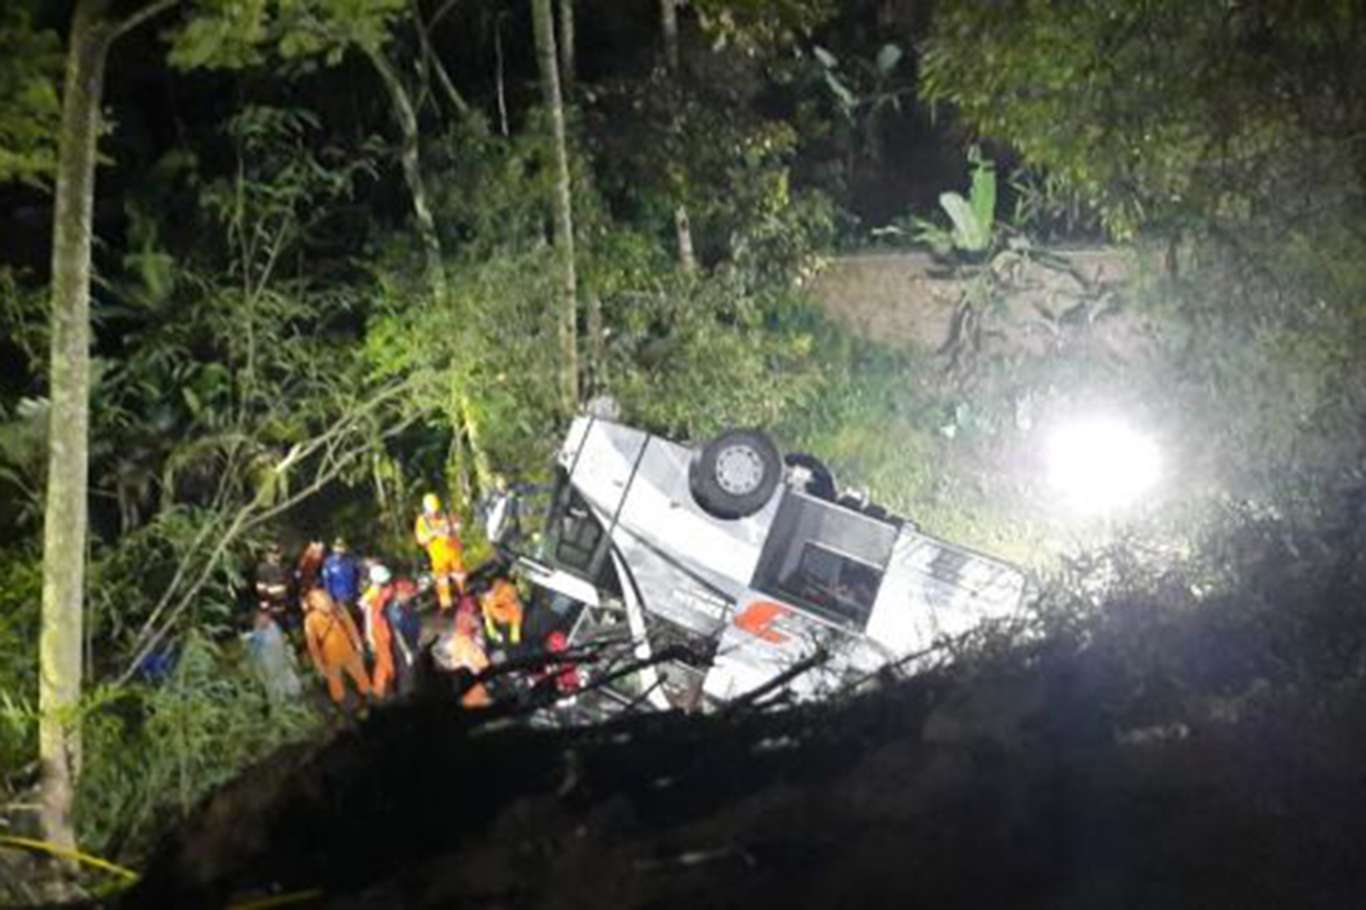 At least 27 dead, 39 injured after Indonesia bus carrying students plunges into ravine